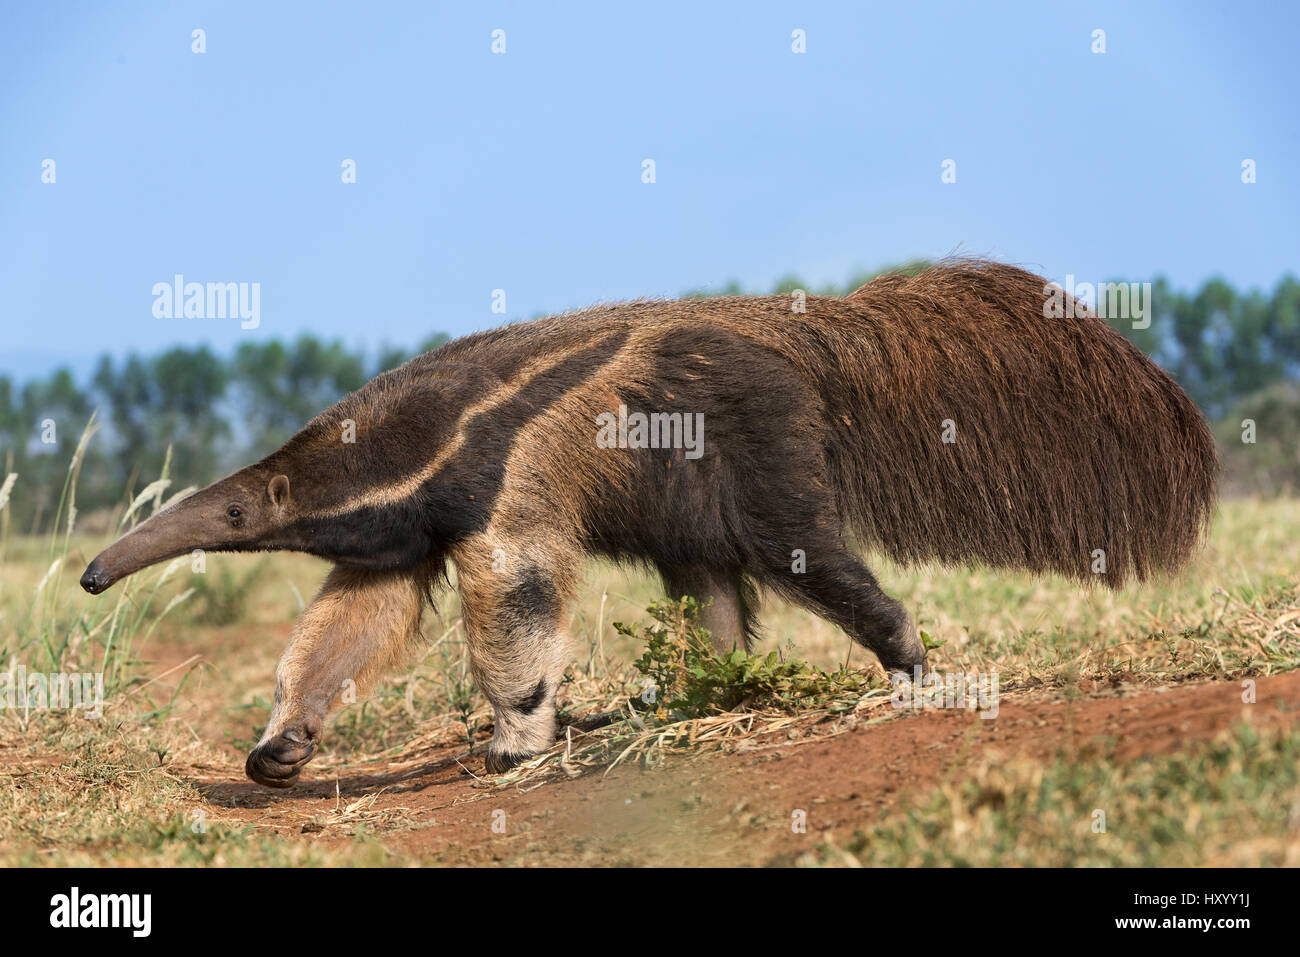 Adult Giant Anteater (Myrmecophaga tridactyla)  foraging. Southern Pantanal, Moto Grosso do Sul State, Brazil. September. Stock Photo